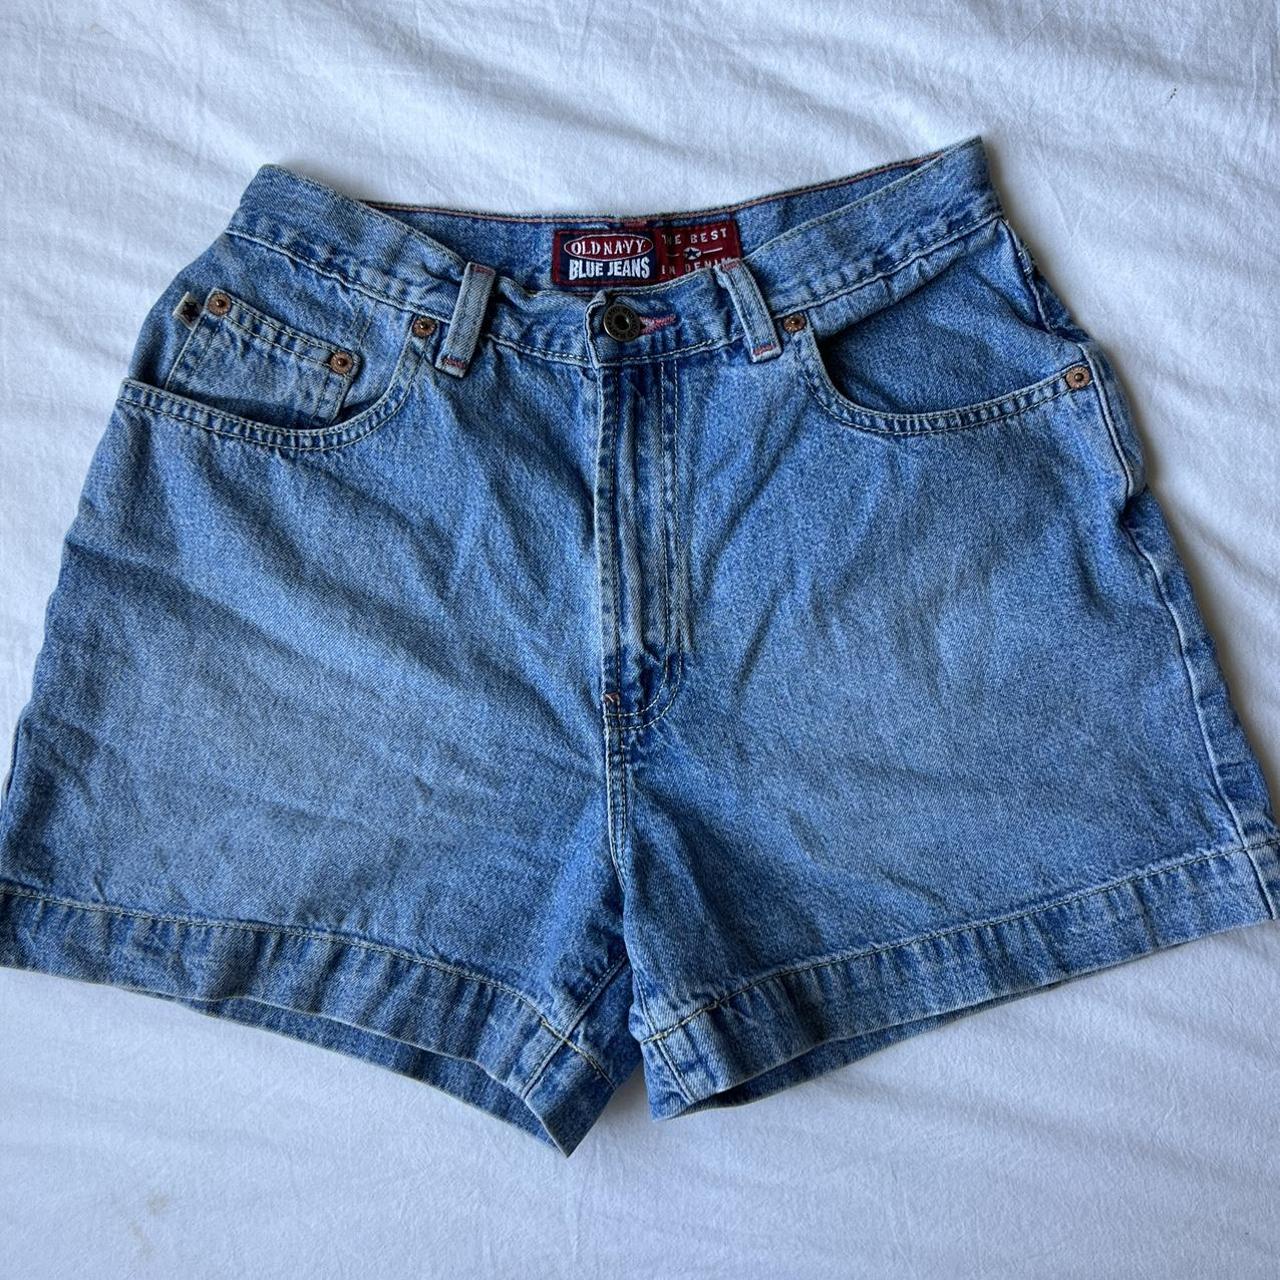 Vintage Old Navy high waisted jorts These cuffed... - Depop